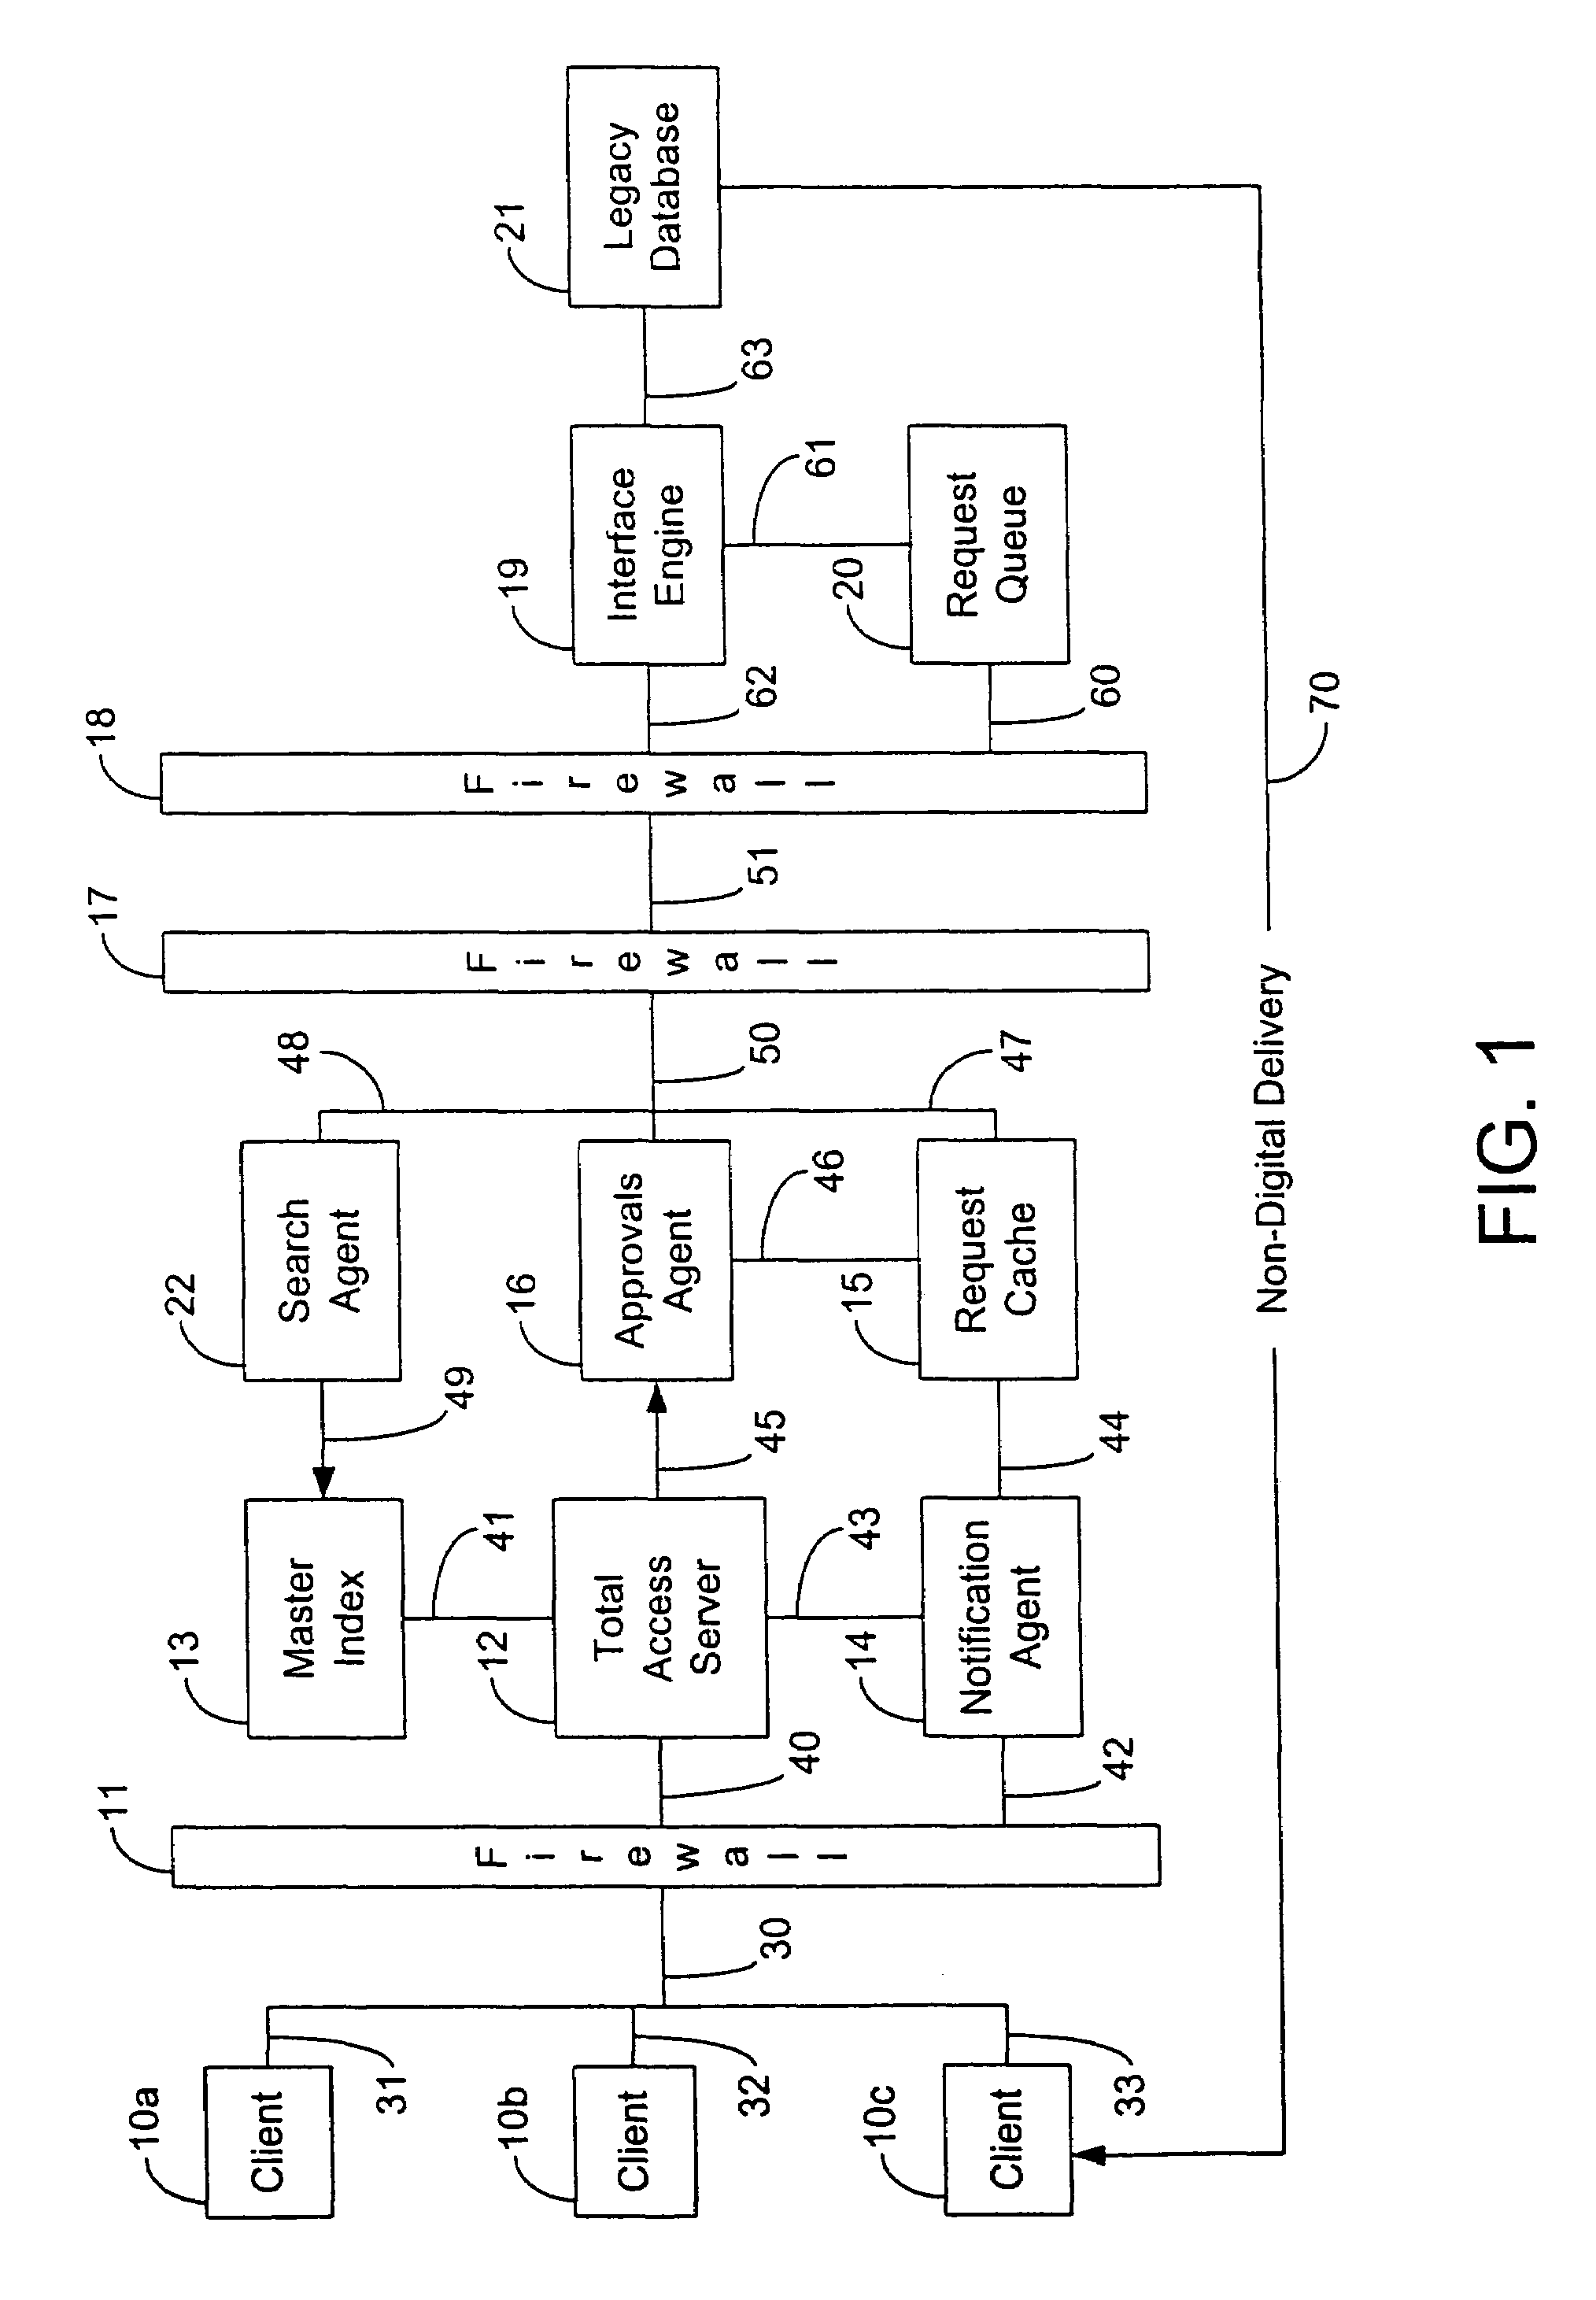 Standing order database search system and method for internet and internet application